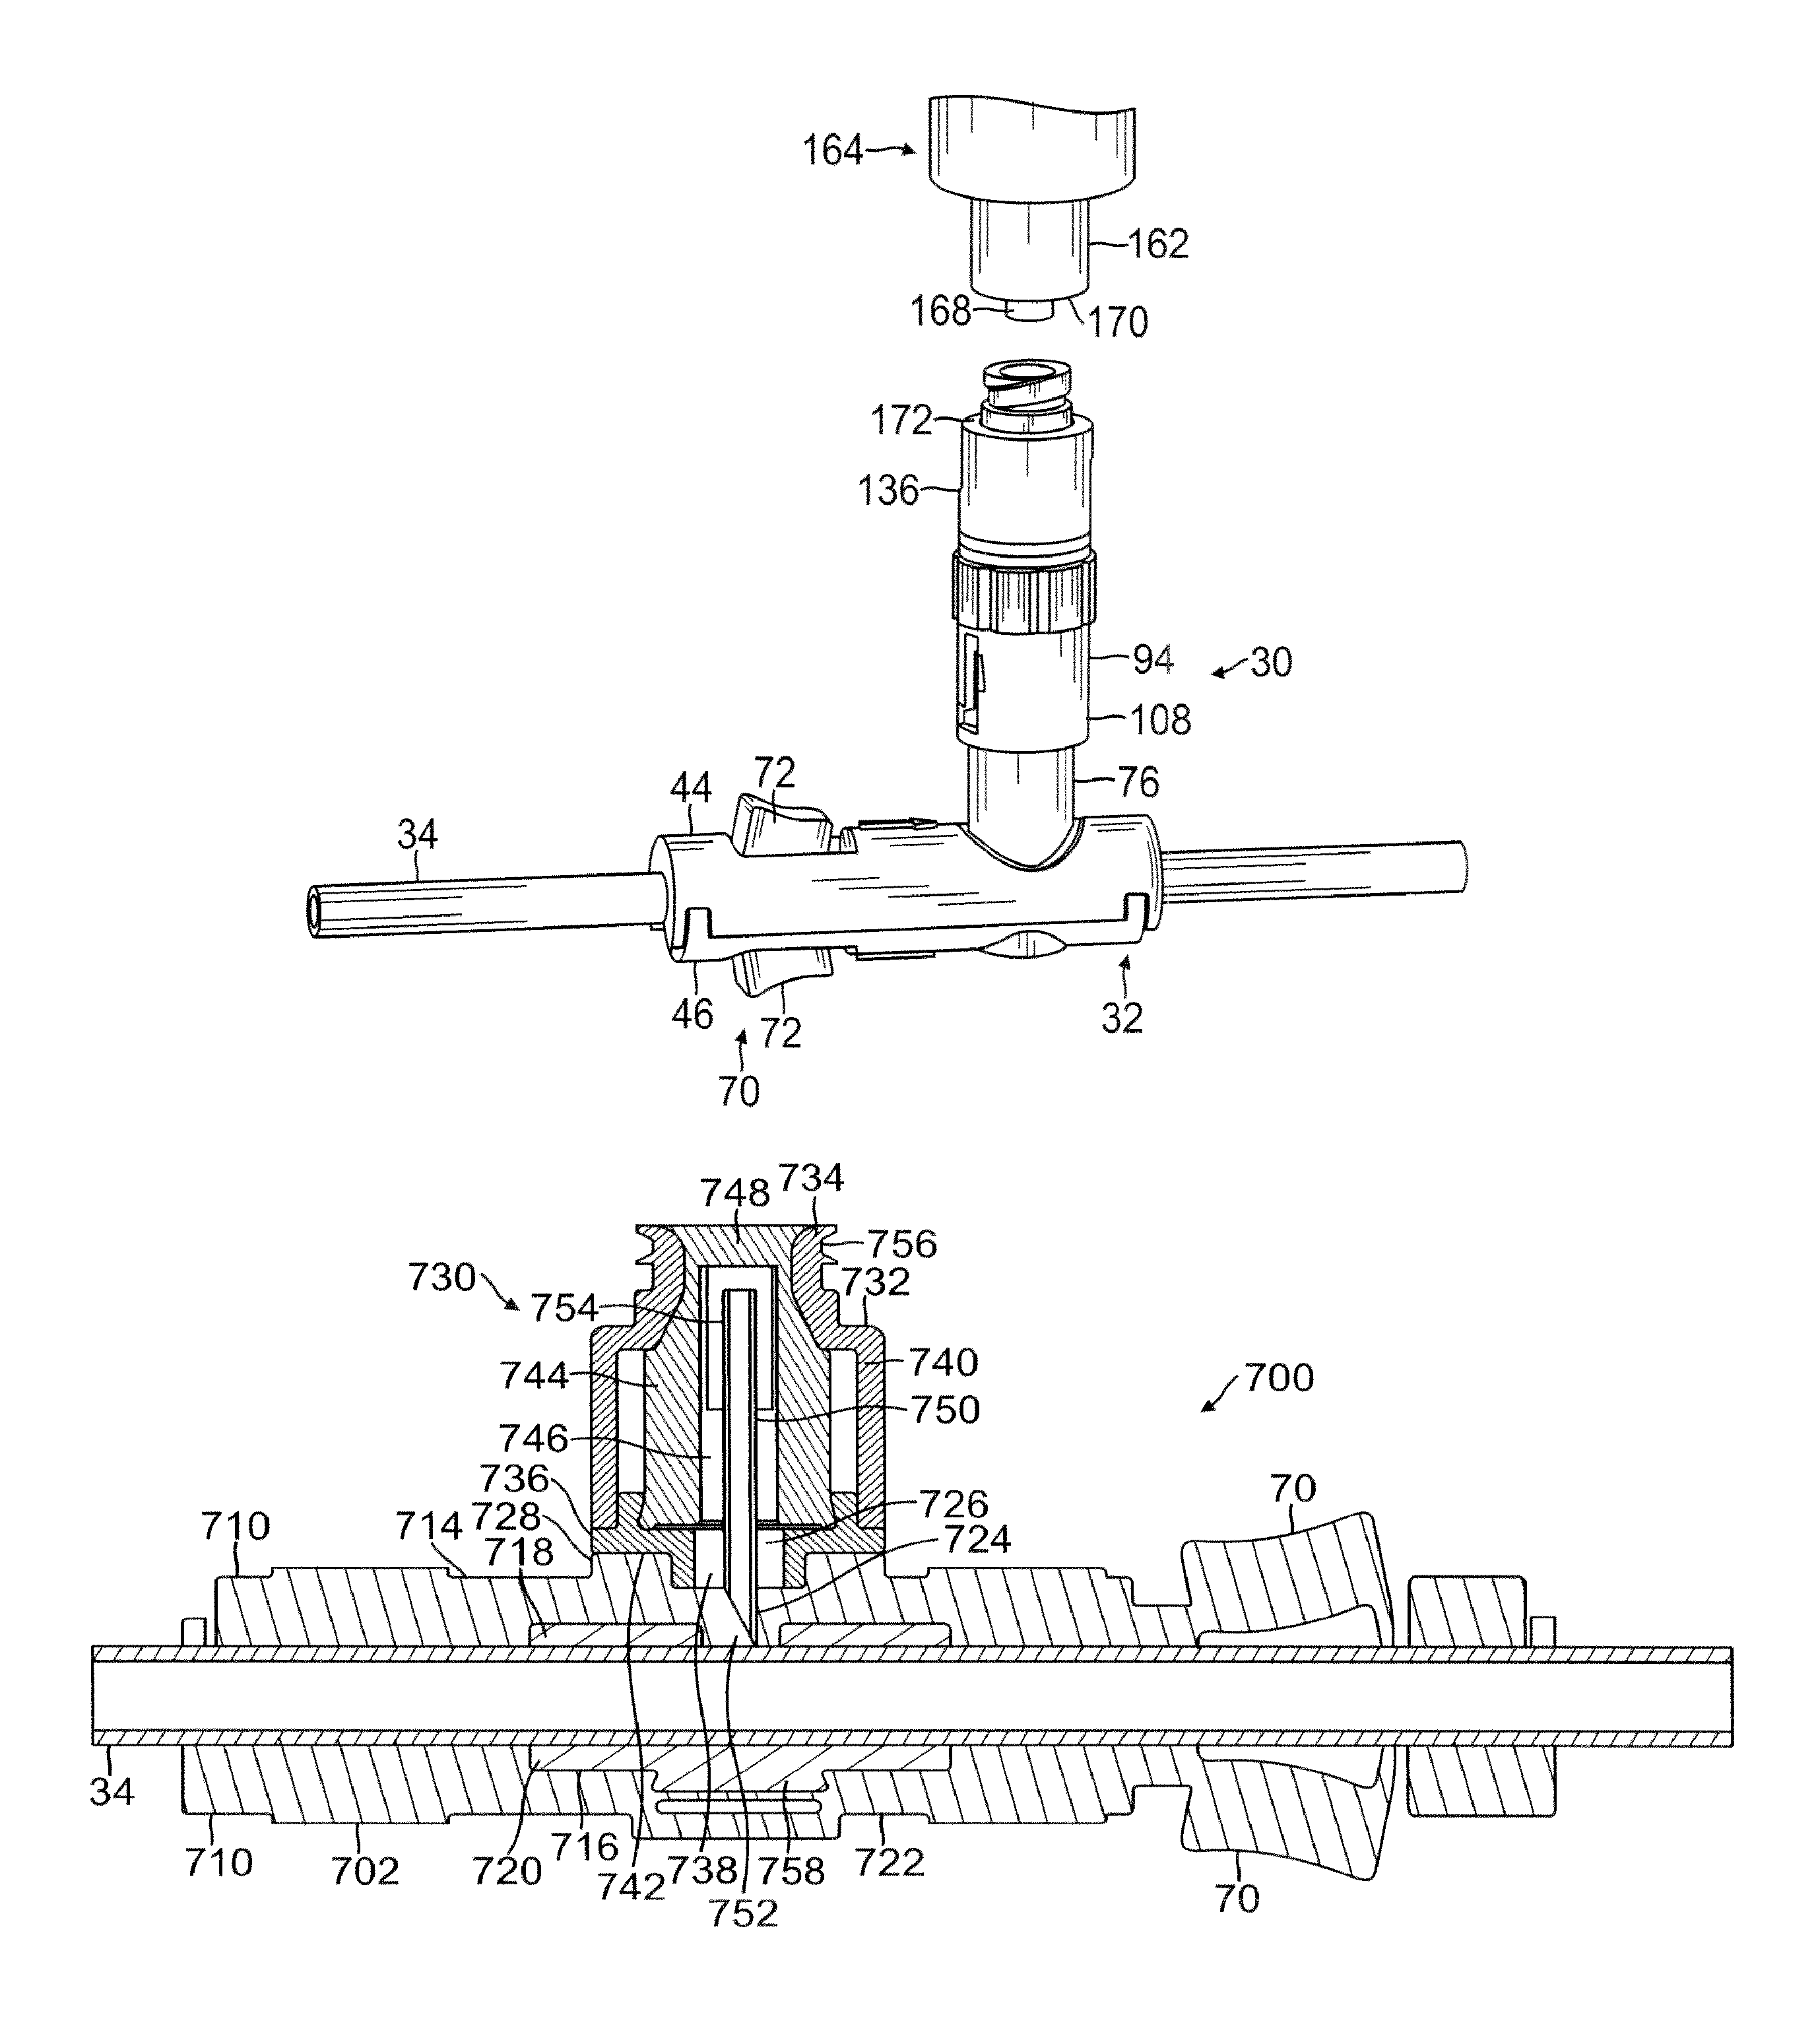 Apparatus for selectively establishing a needleless injection port on IV tubing, and associated methods